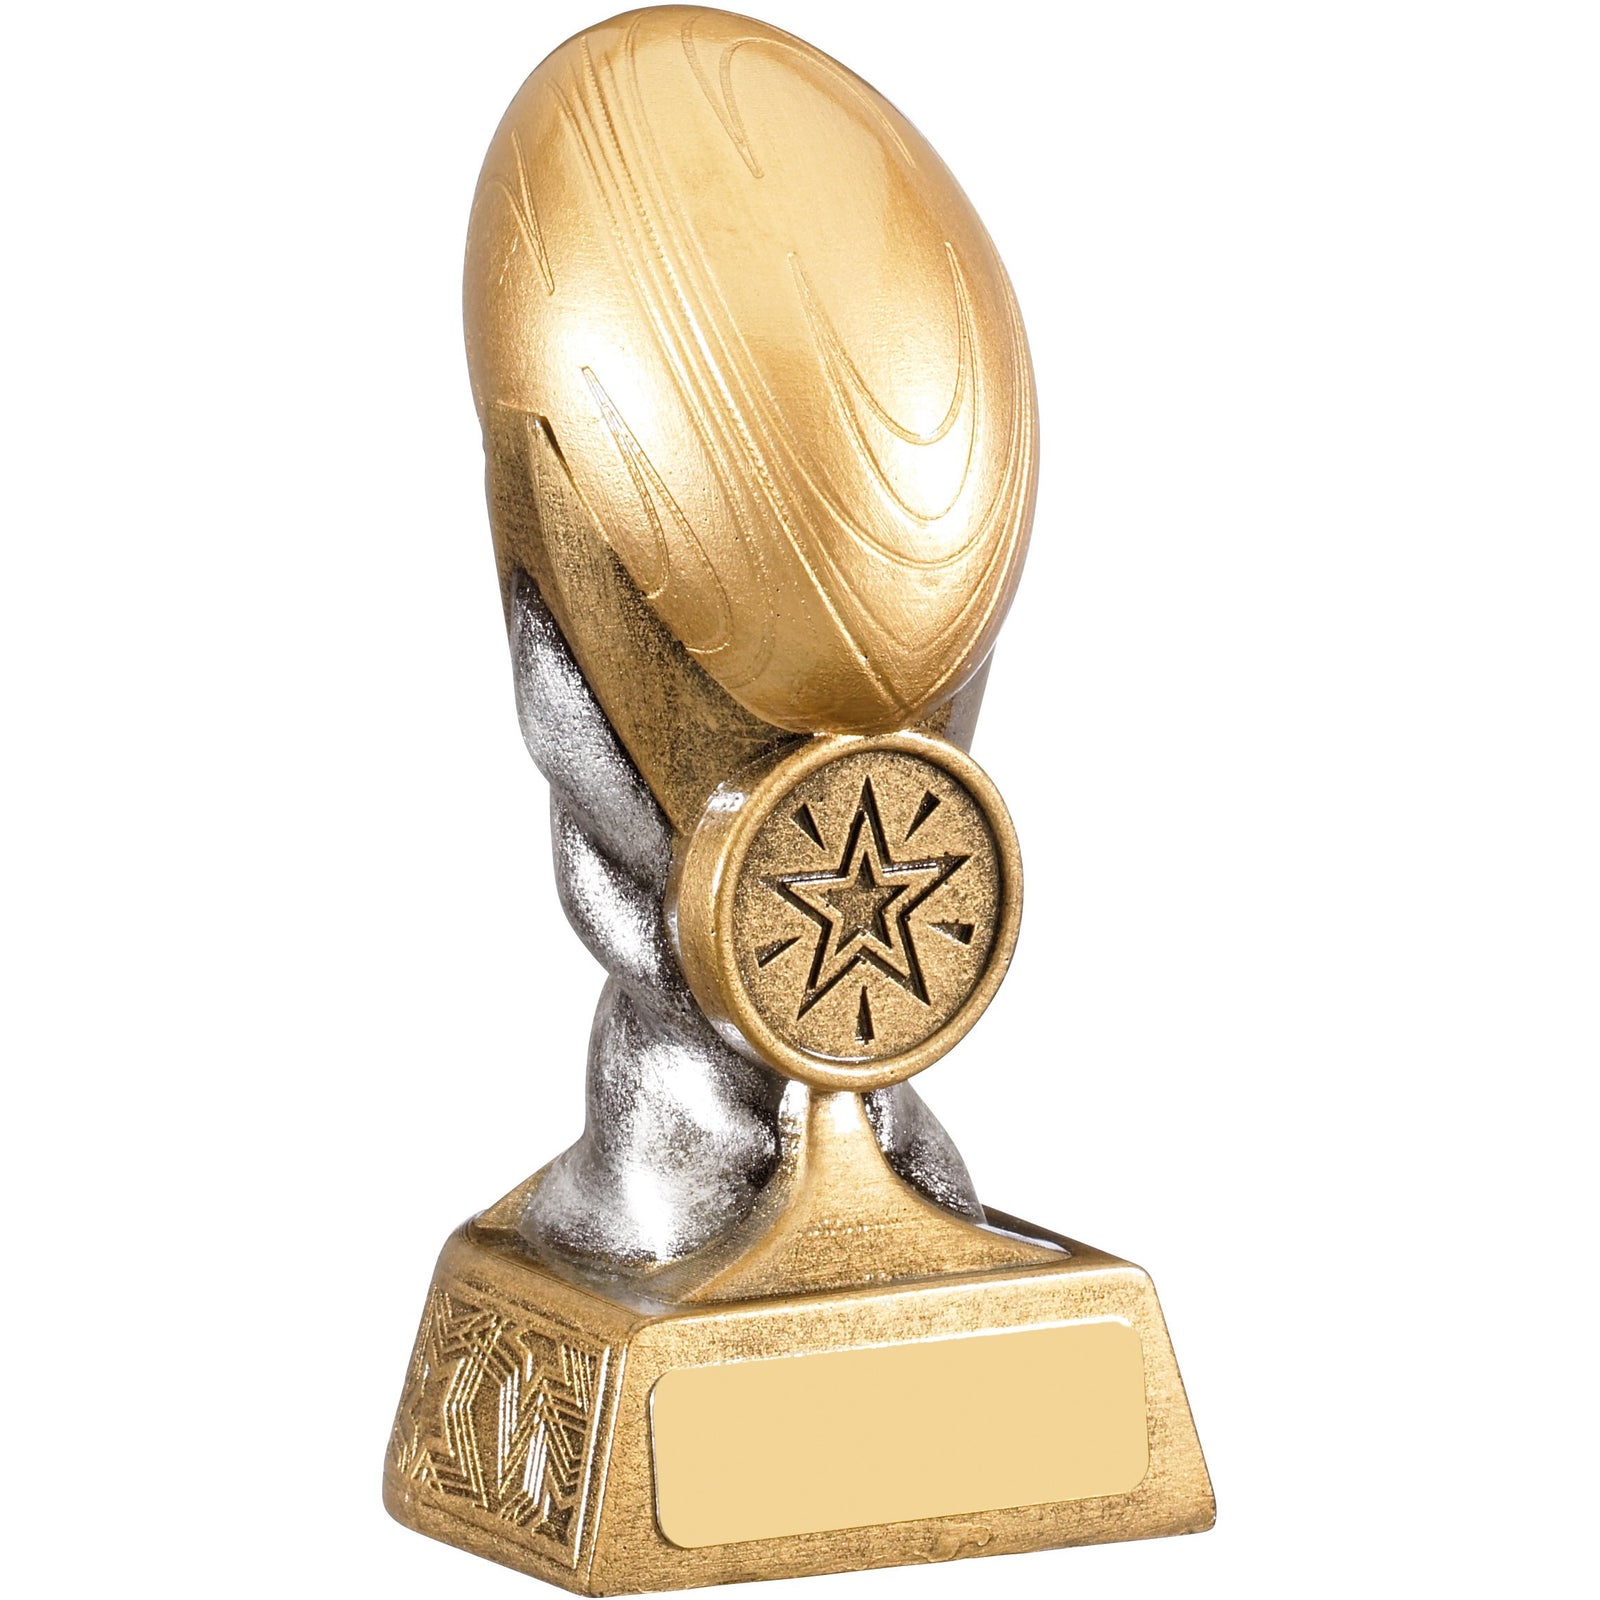 Eclipse Rugby Ball Statue Award